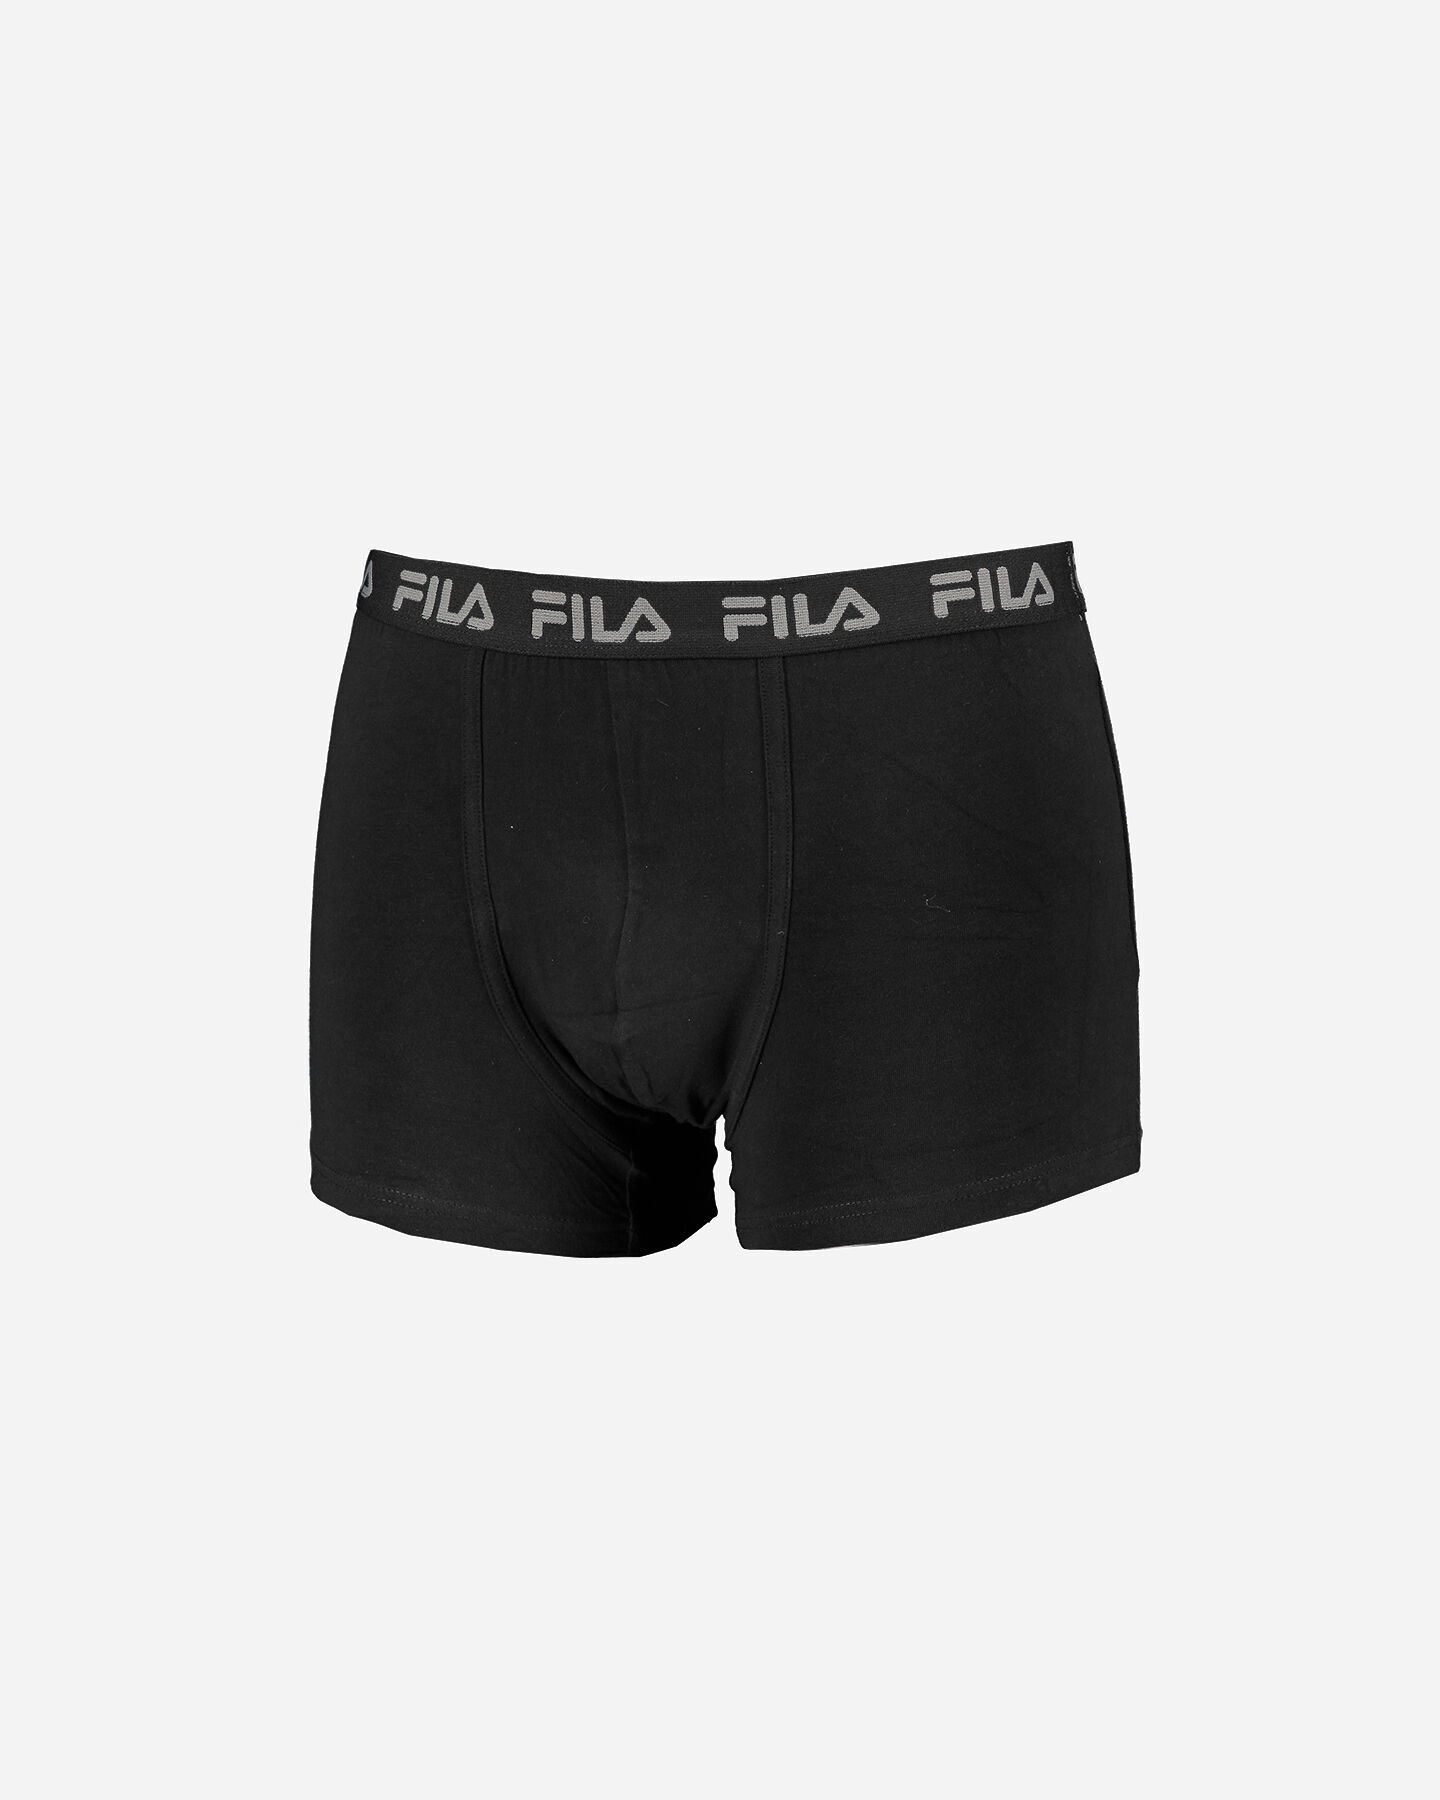  Intimo FILA 2PACK BOXER PLACED LOGO M S4089016|200|S scatto 1